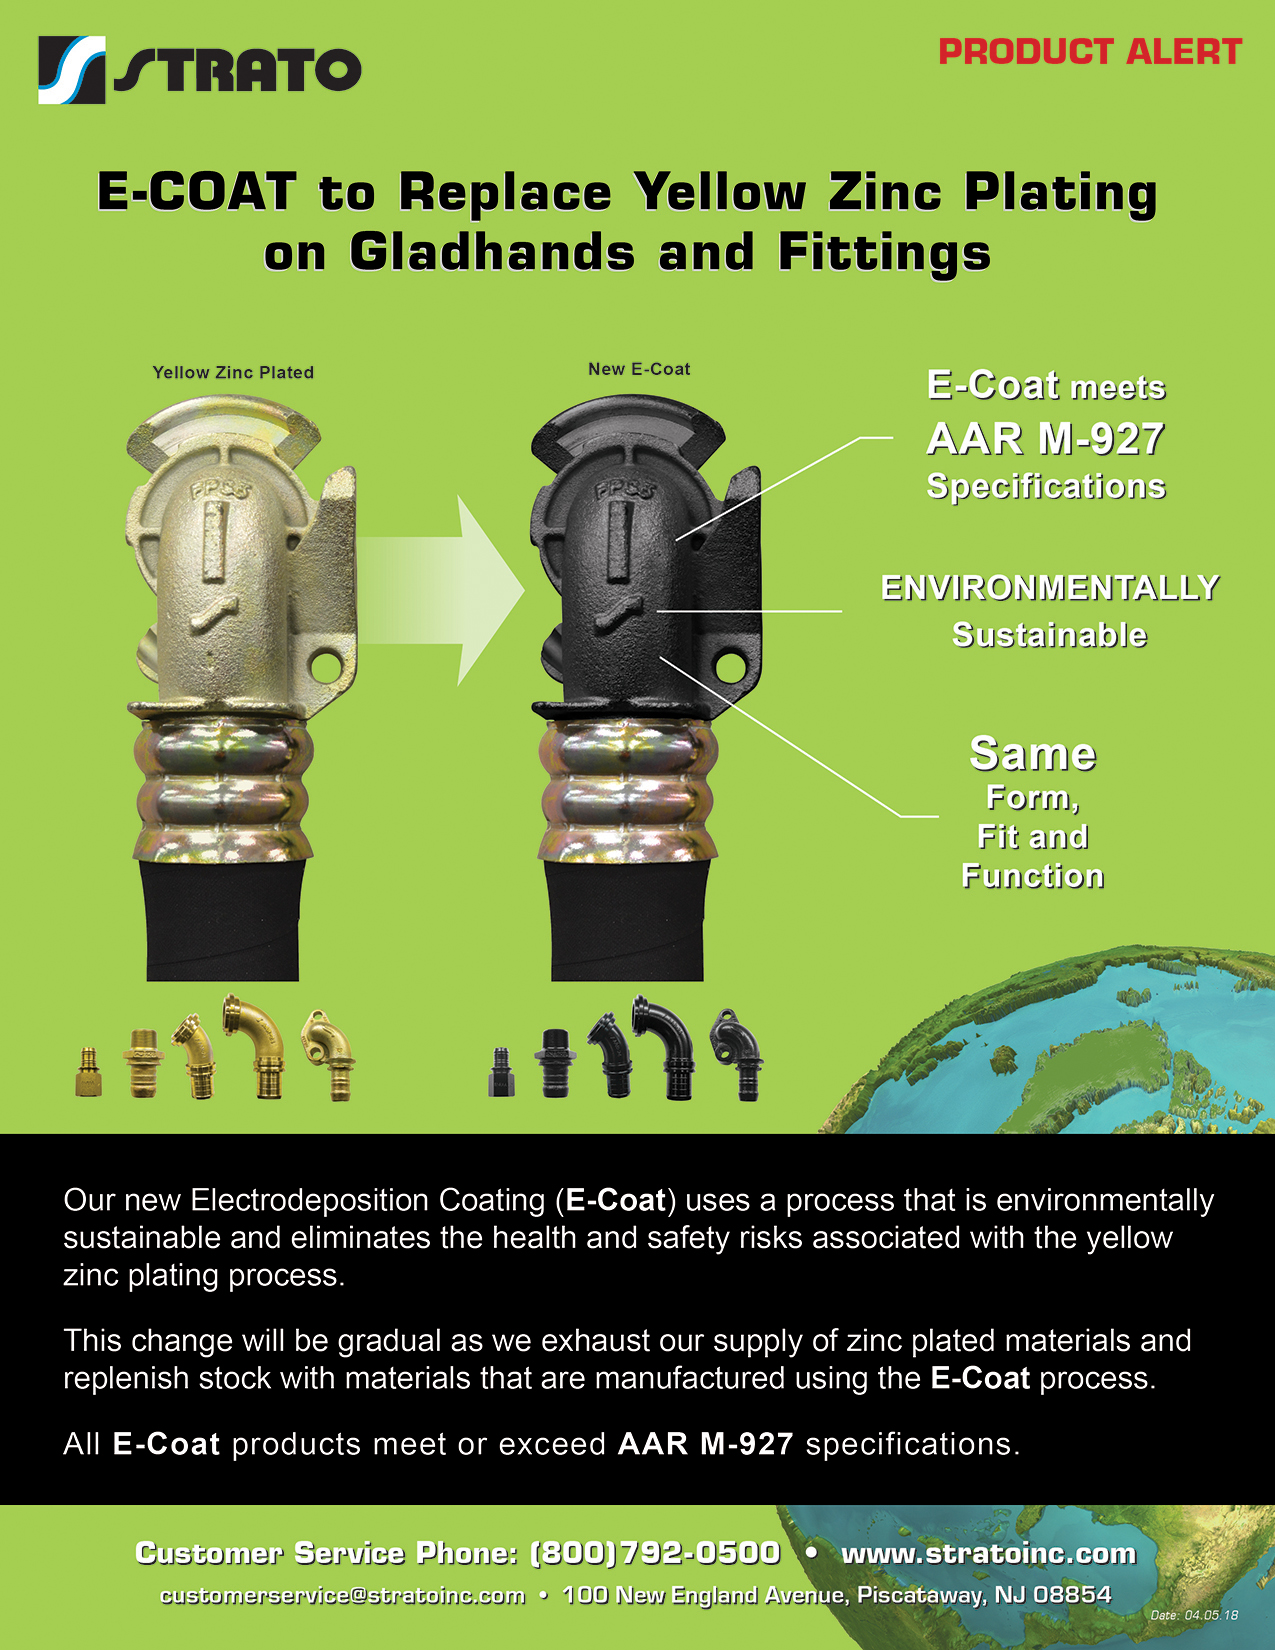 Ecoat flyer for fittings